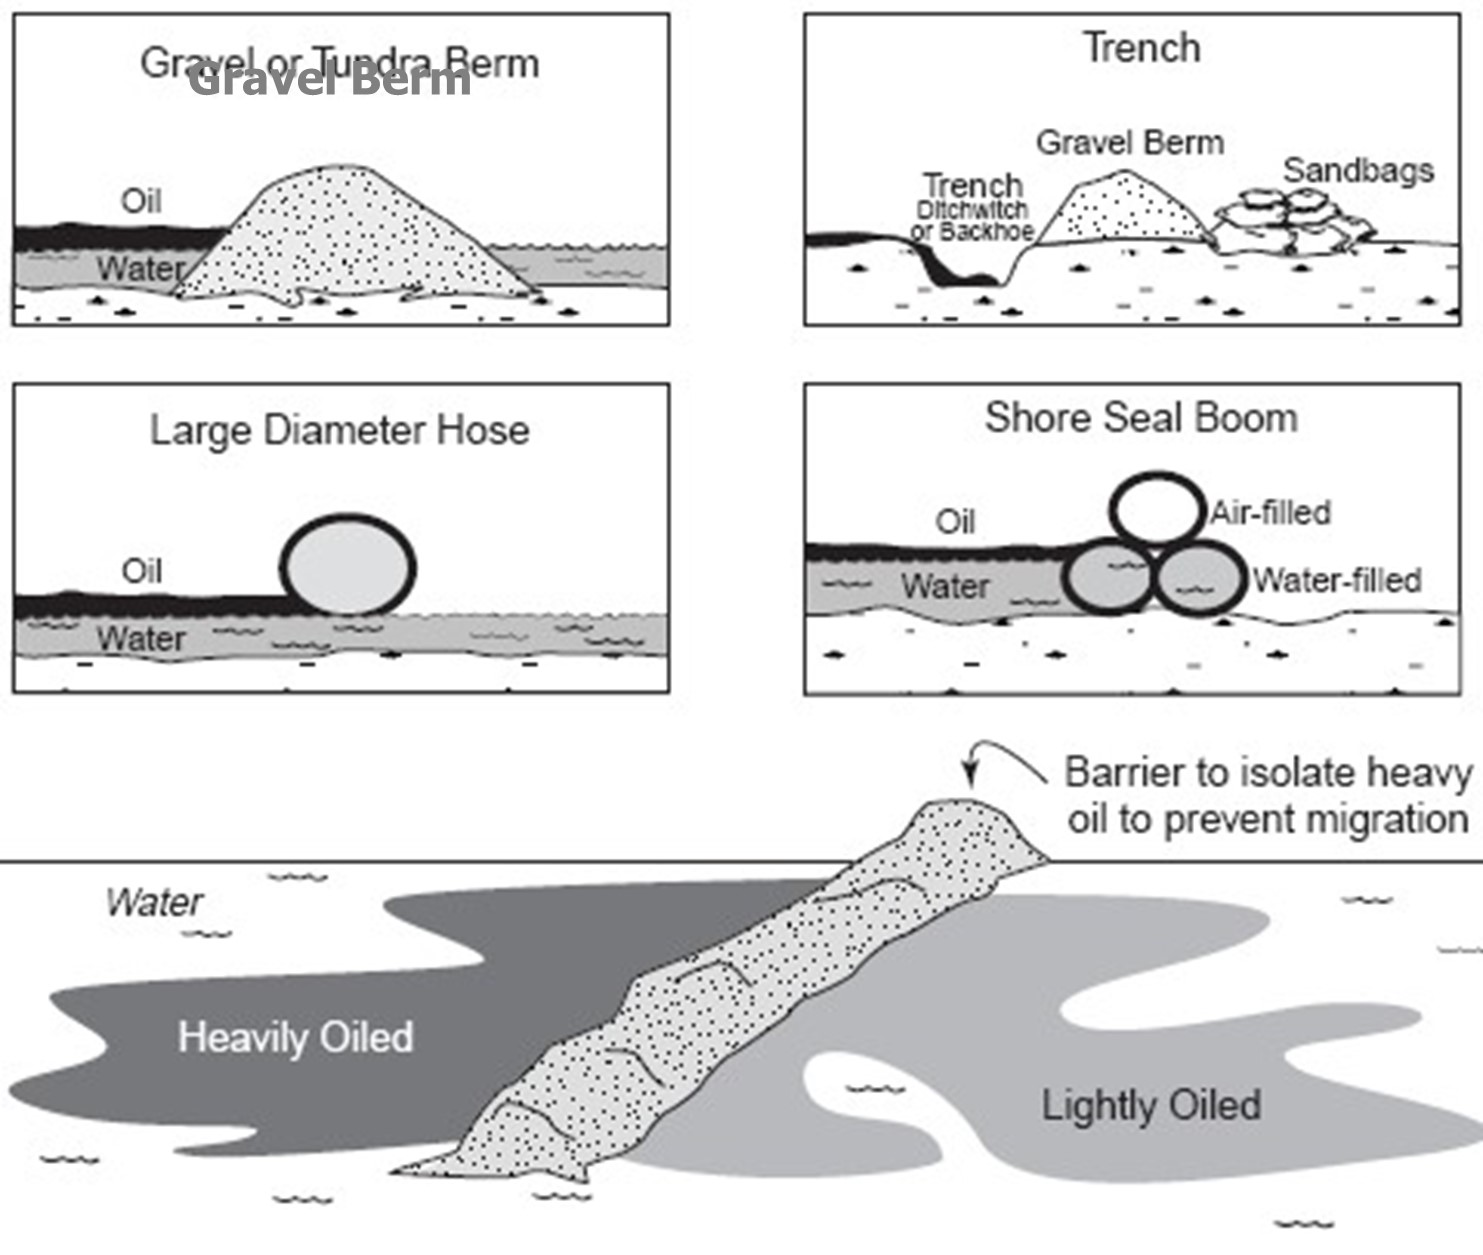 illustration of berms, trenches, hoses, and boom used to contain product on land